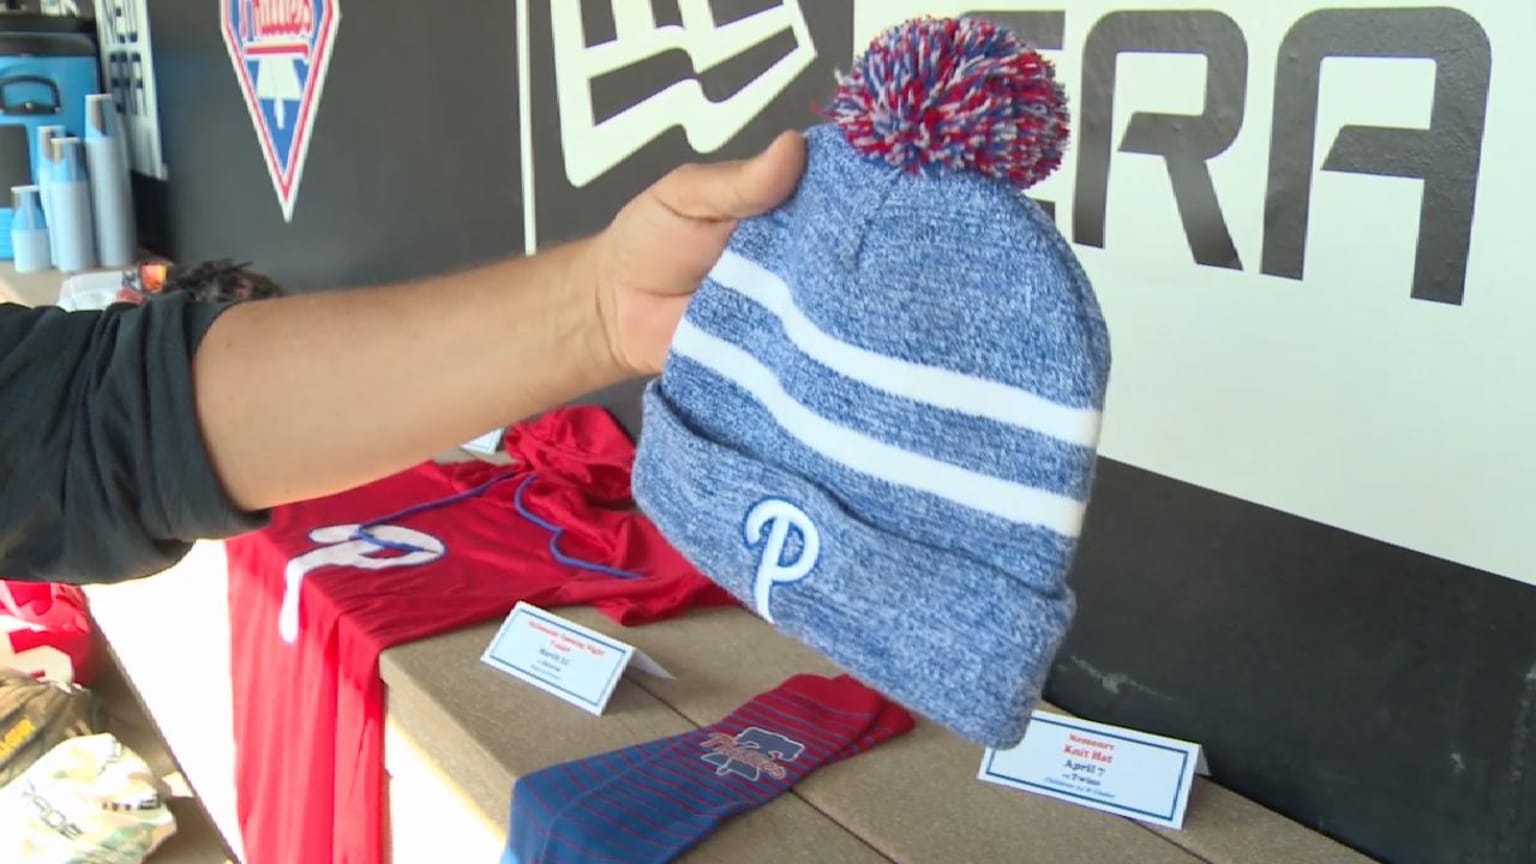 Phillies Giveaway Items